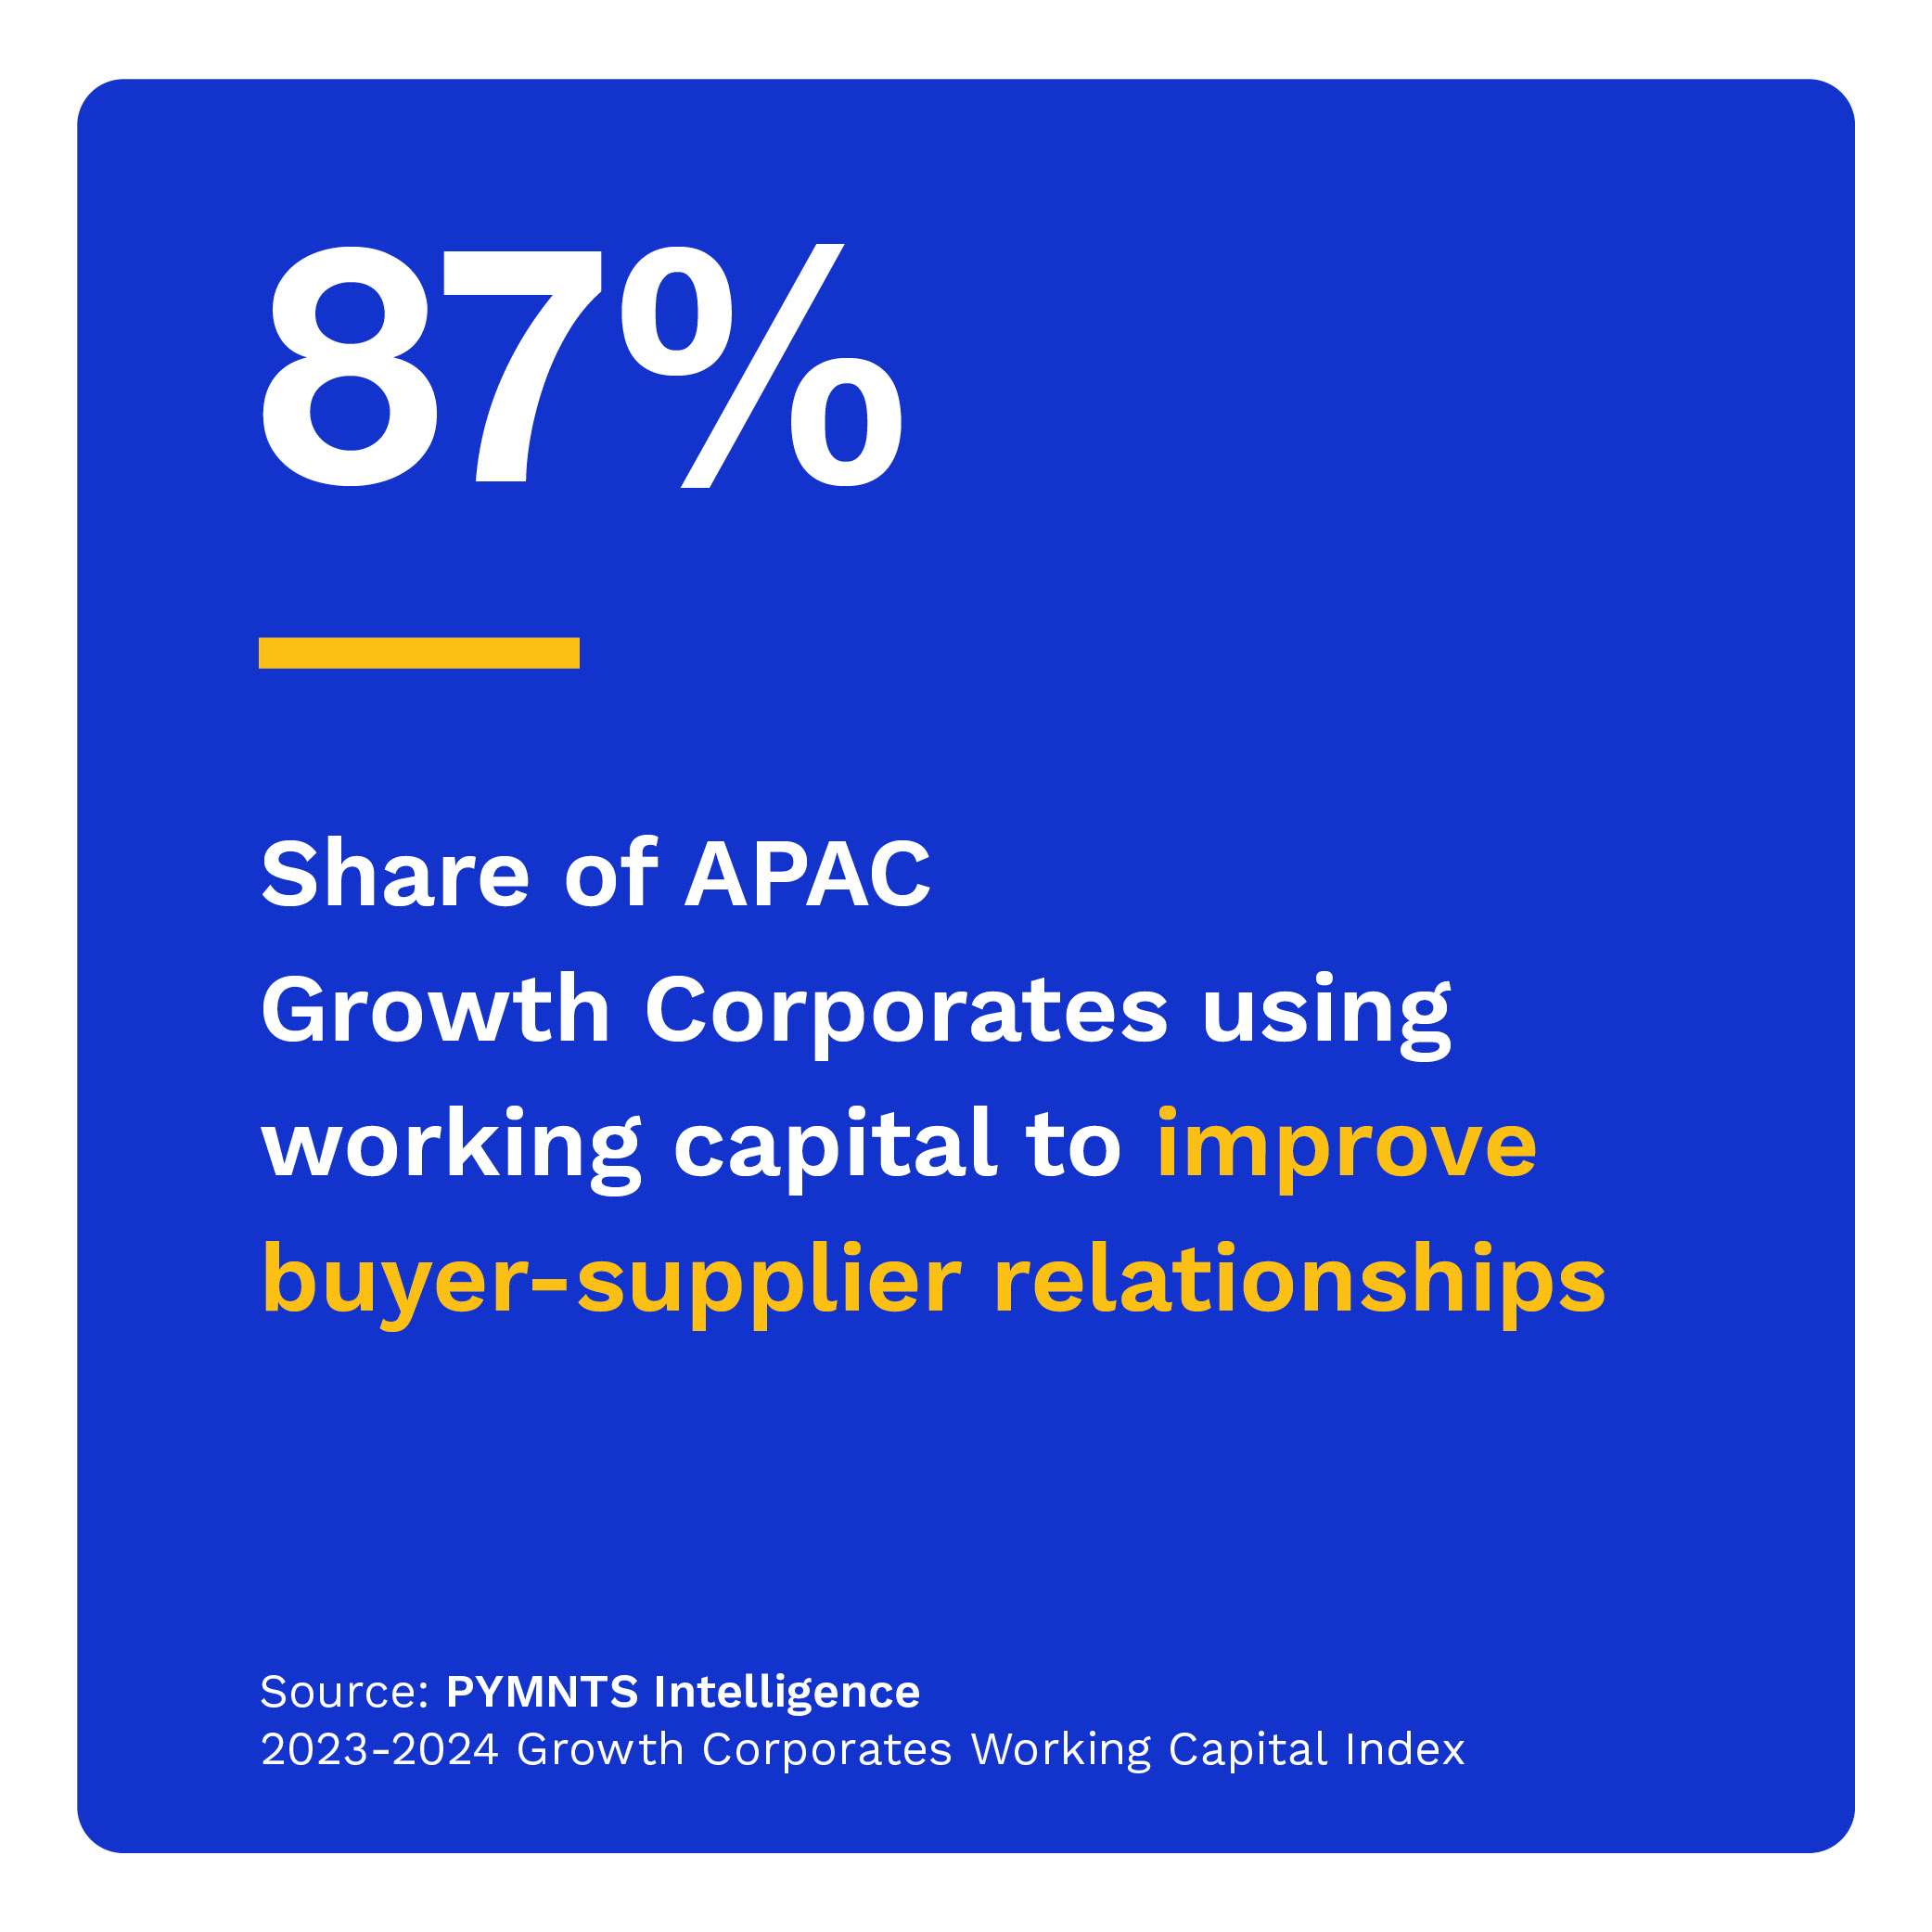 87%: Share of APAC Growth Corporates using working capital to improve buyer-supplier relationships